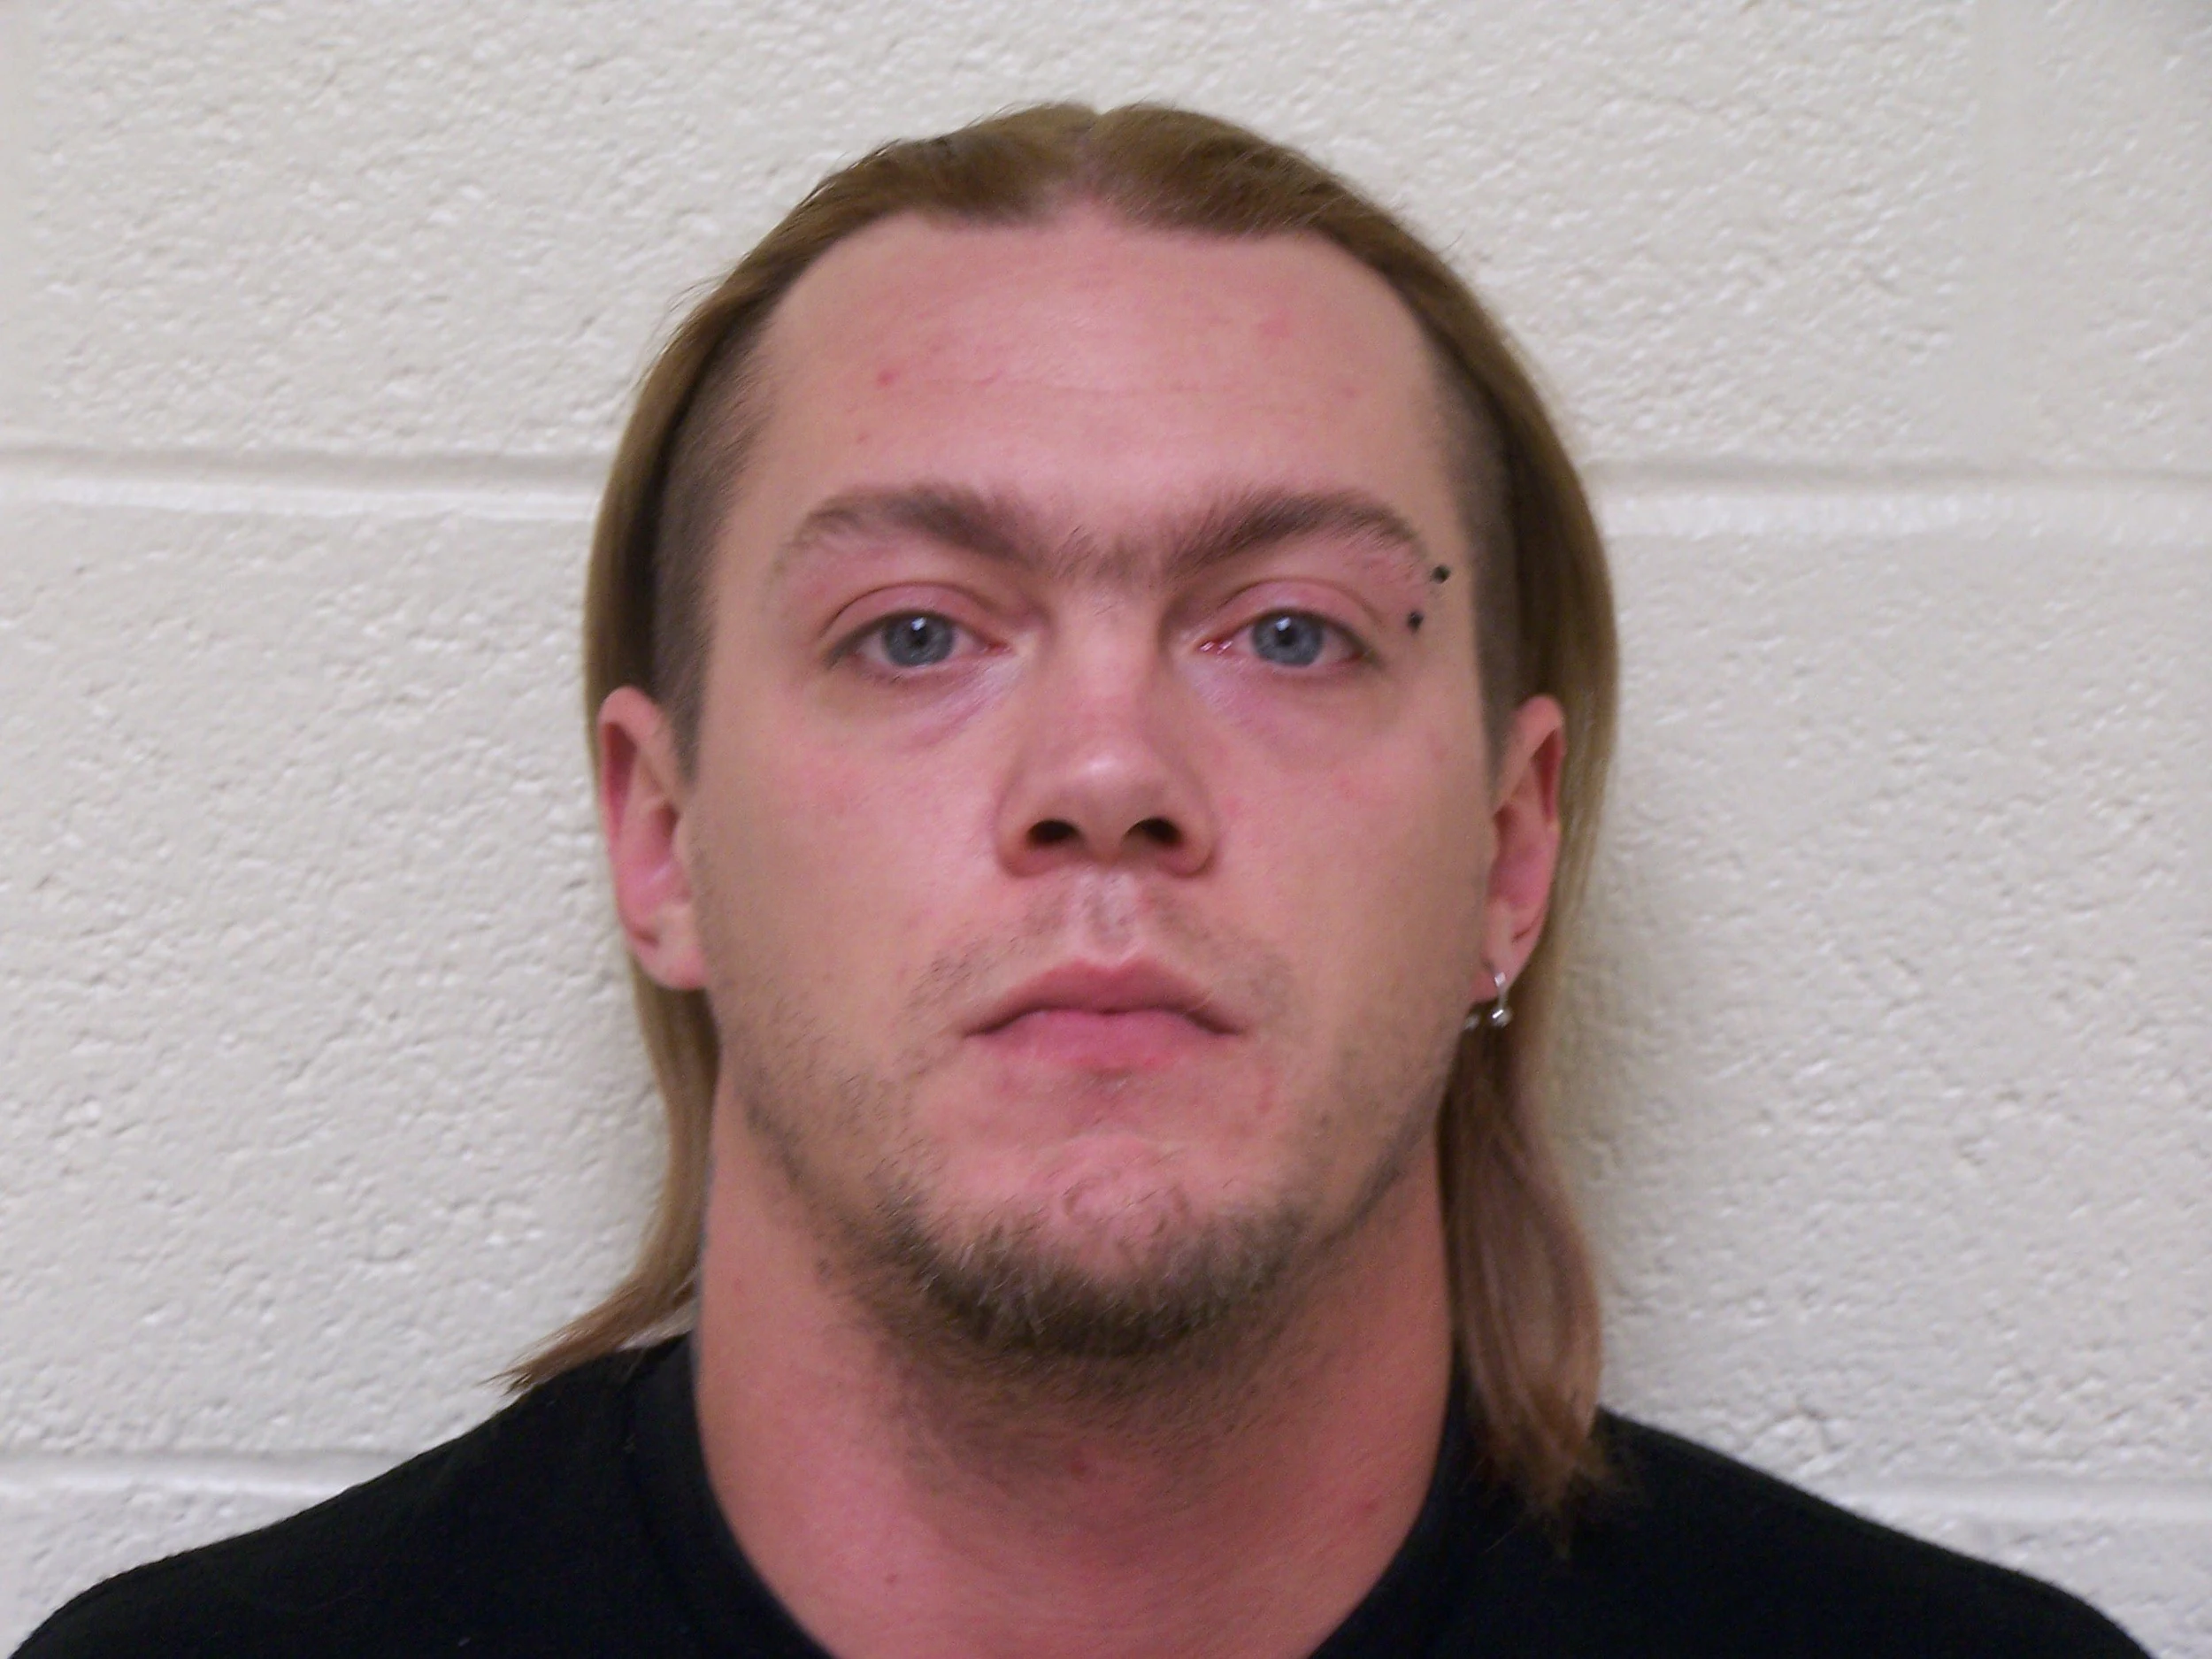 Houlton Man Arrested for Burning His Two Kids with Cigarettes